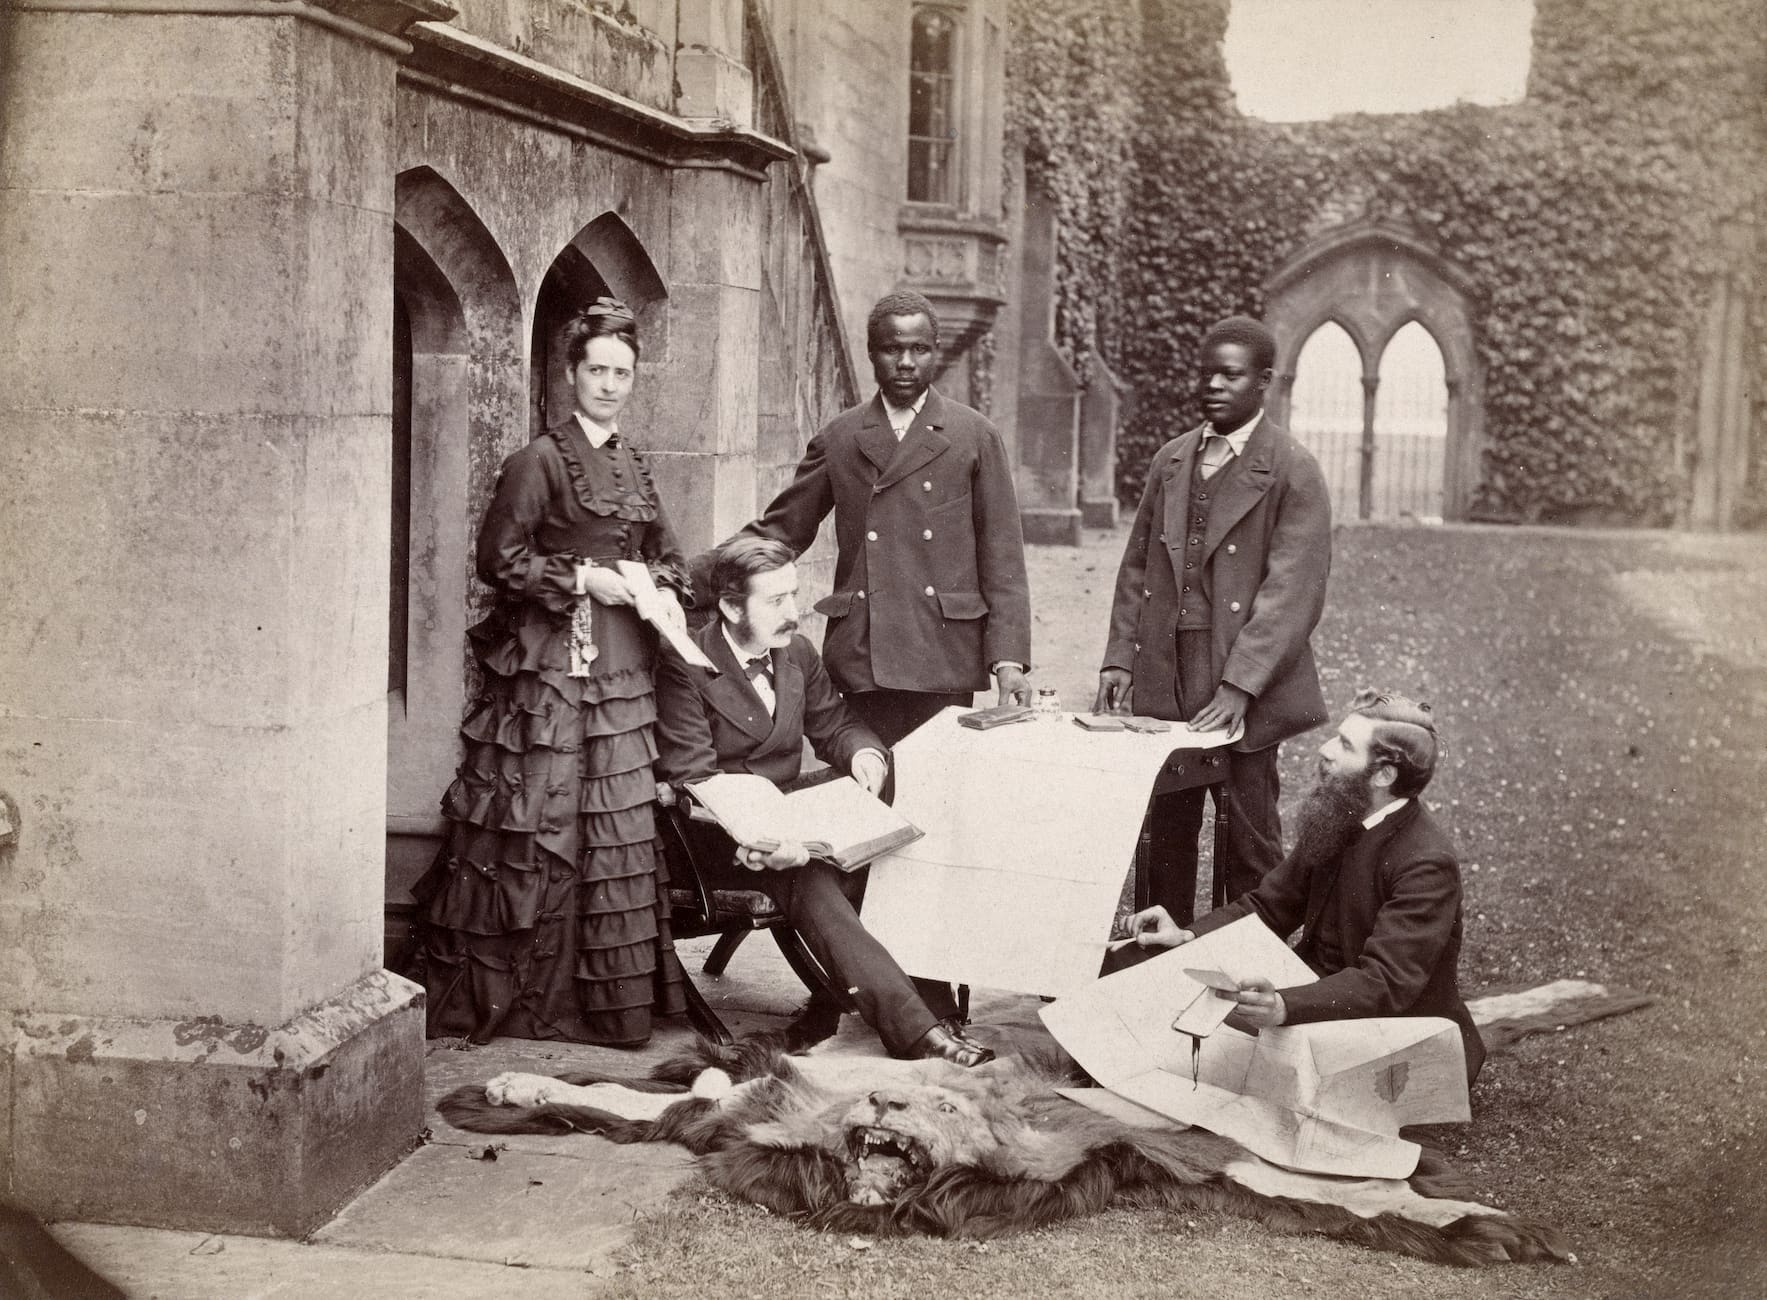 From left to right: Agnes Livingstone, Thomas Livingstone, daughter and son of David Livingstone, Abdullah Susi, James Chuma and Reverend Horace Waller, by R Allen & Sons, 1874